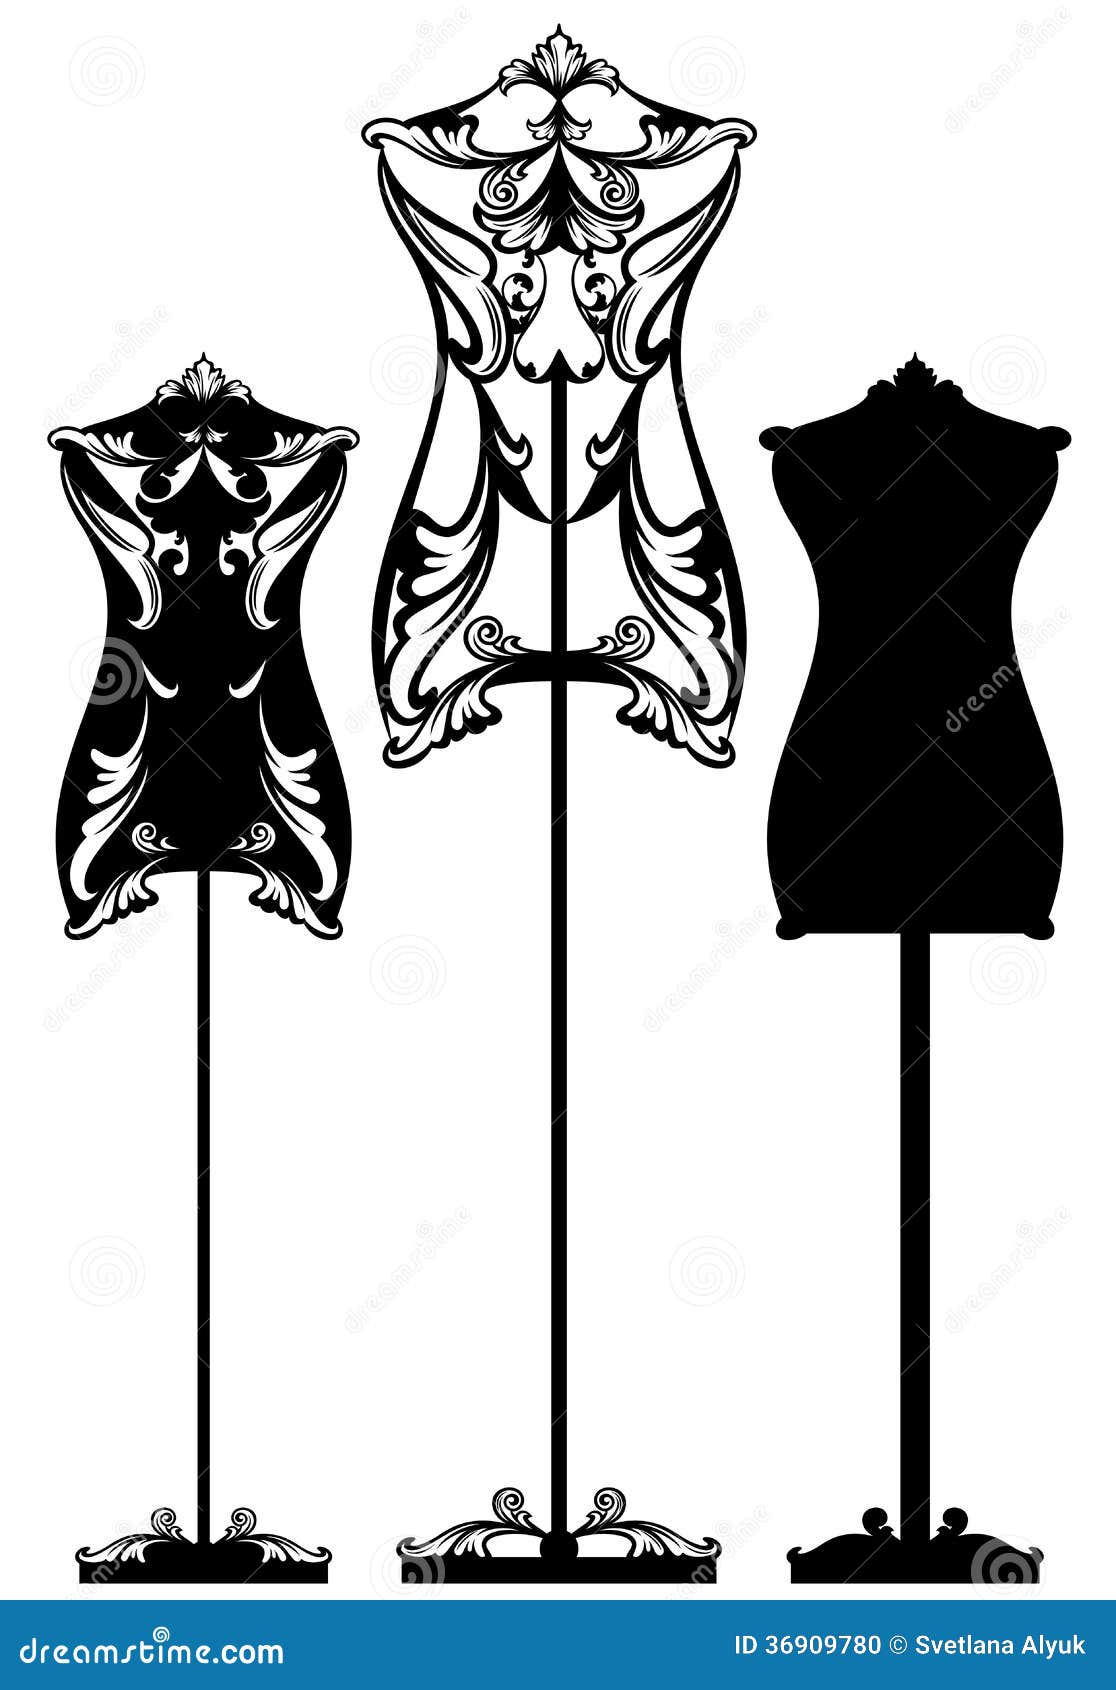 Black Silhouettes Of Mannequins For Sewing On A White Background Vintage  Female Dummy Dress Mannequin Flat Style Stock Illustration - Download Image  Now - iStock